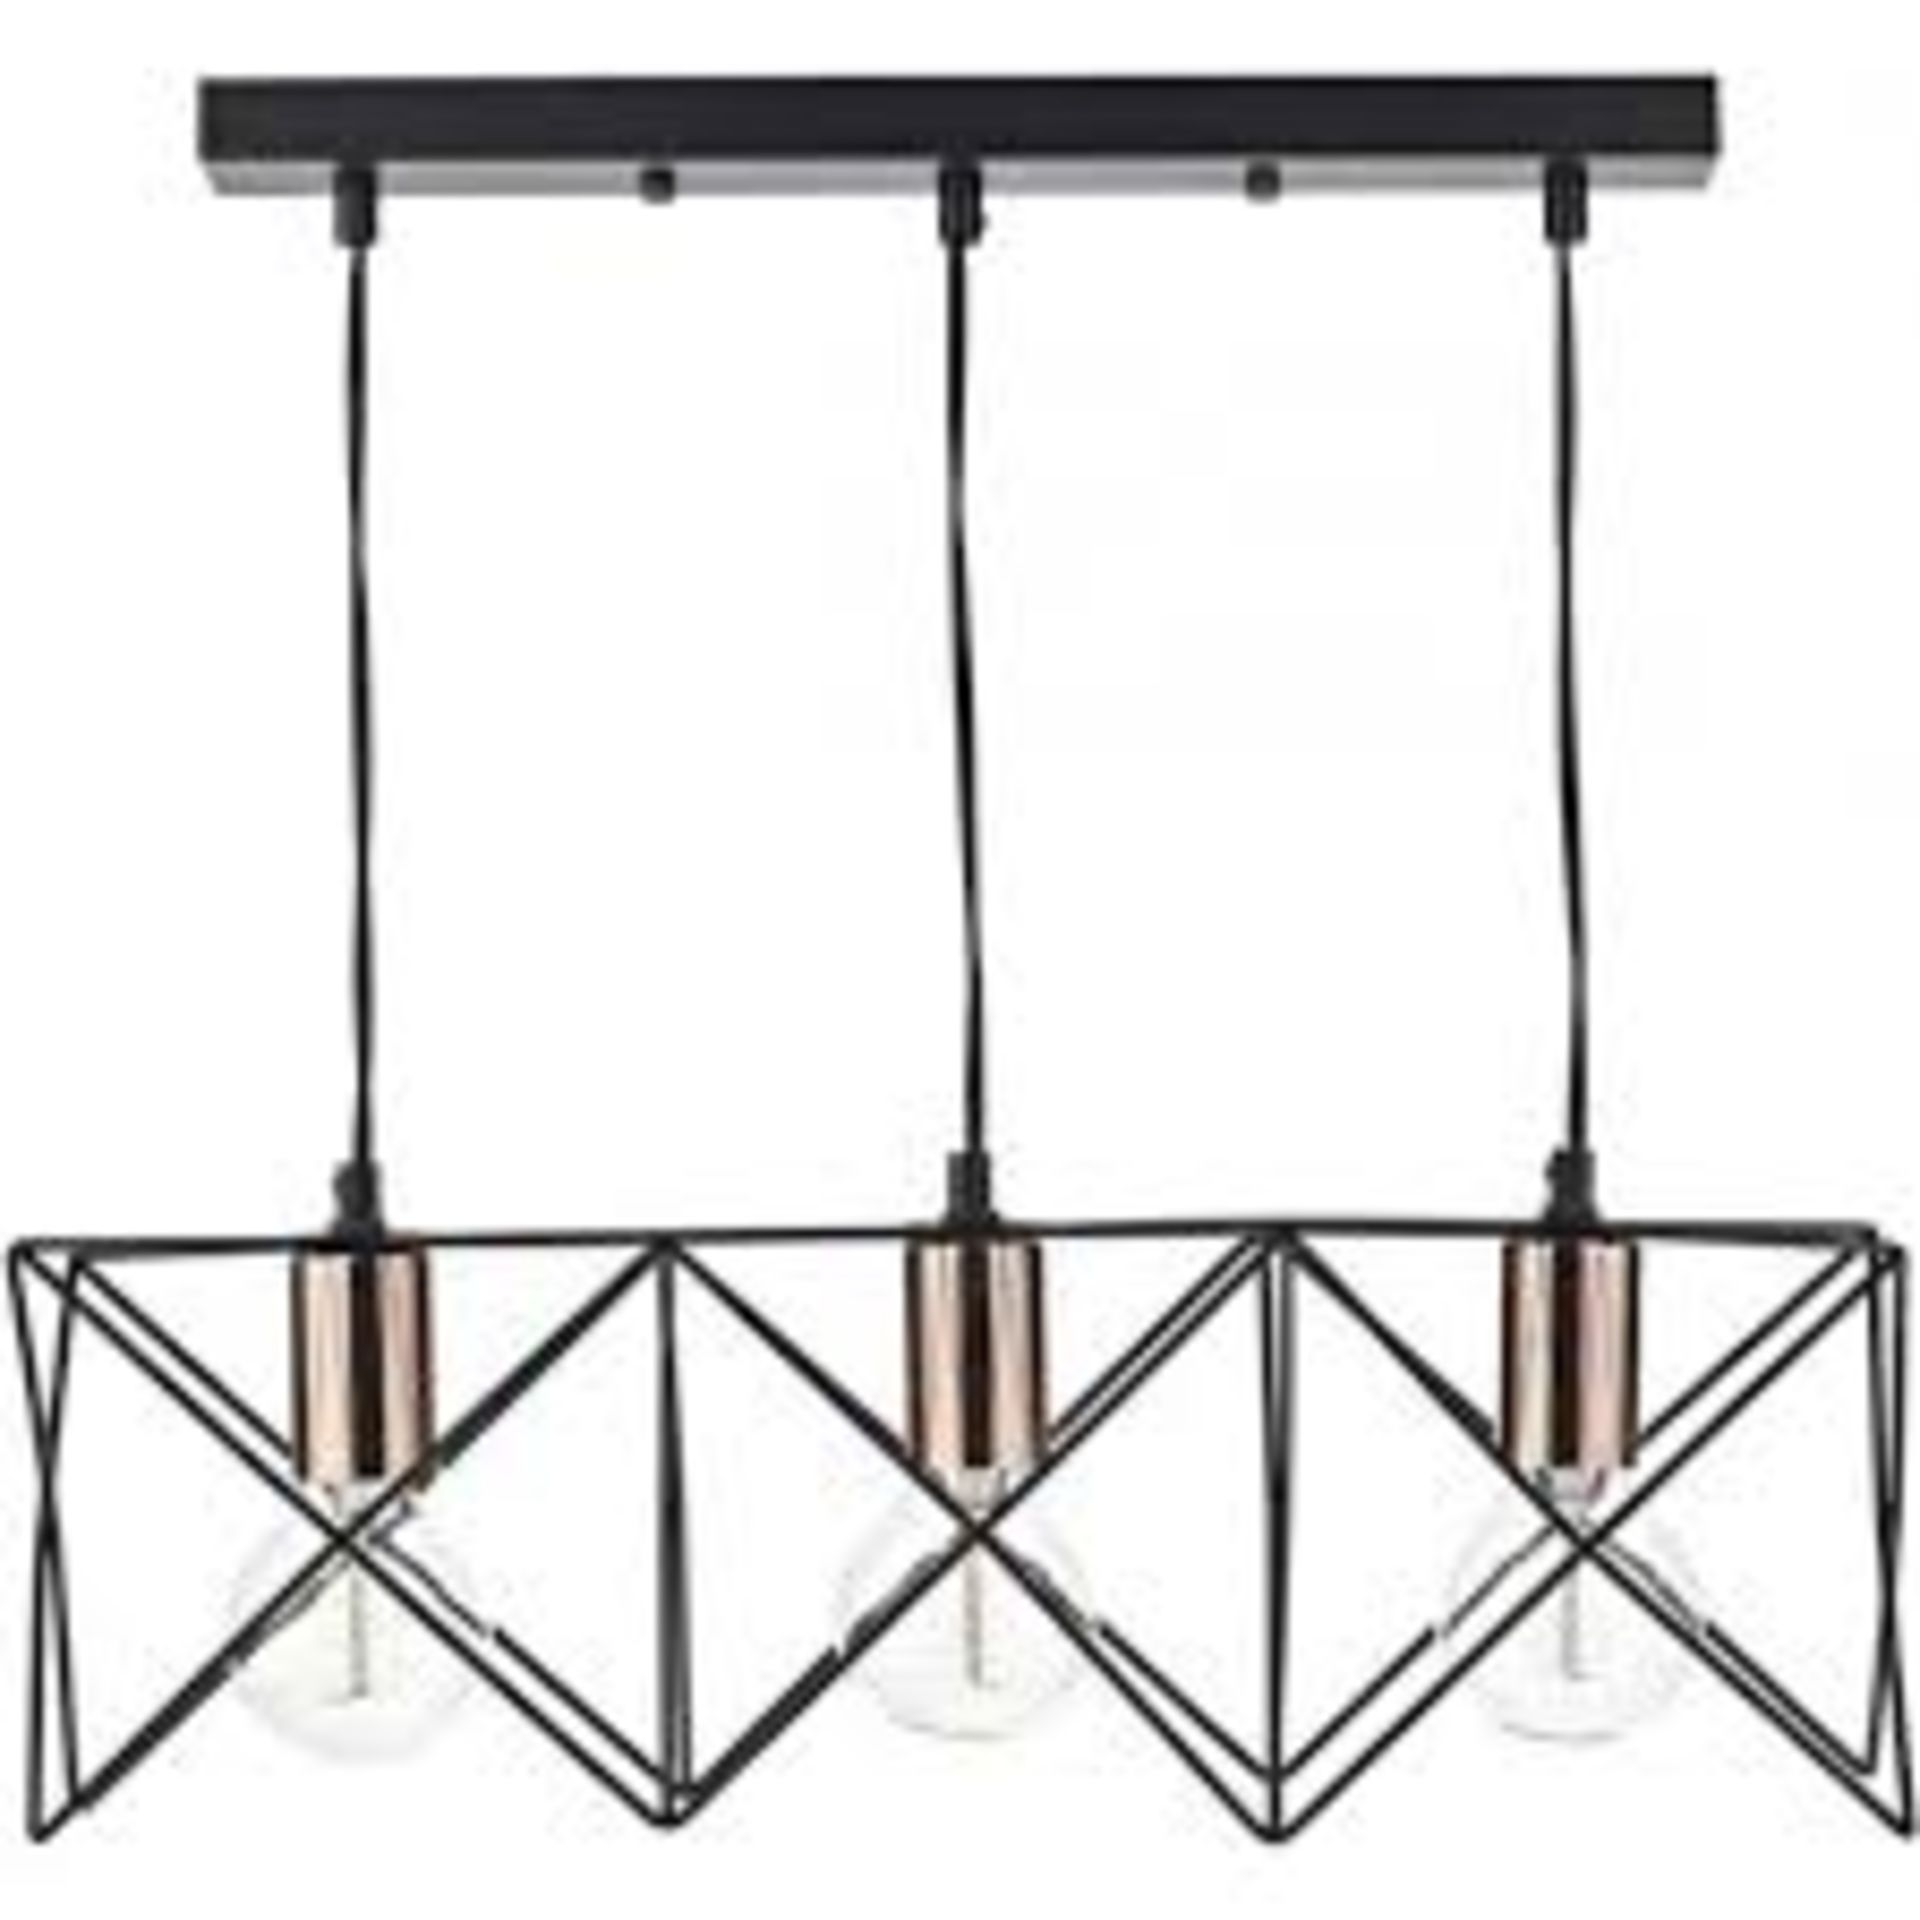 Boxed Midi 3 Light Black Finish Ceiling Light Pendant RRP £60 (14671) (Public Viewing and Appraisals